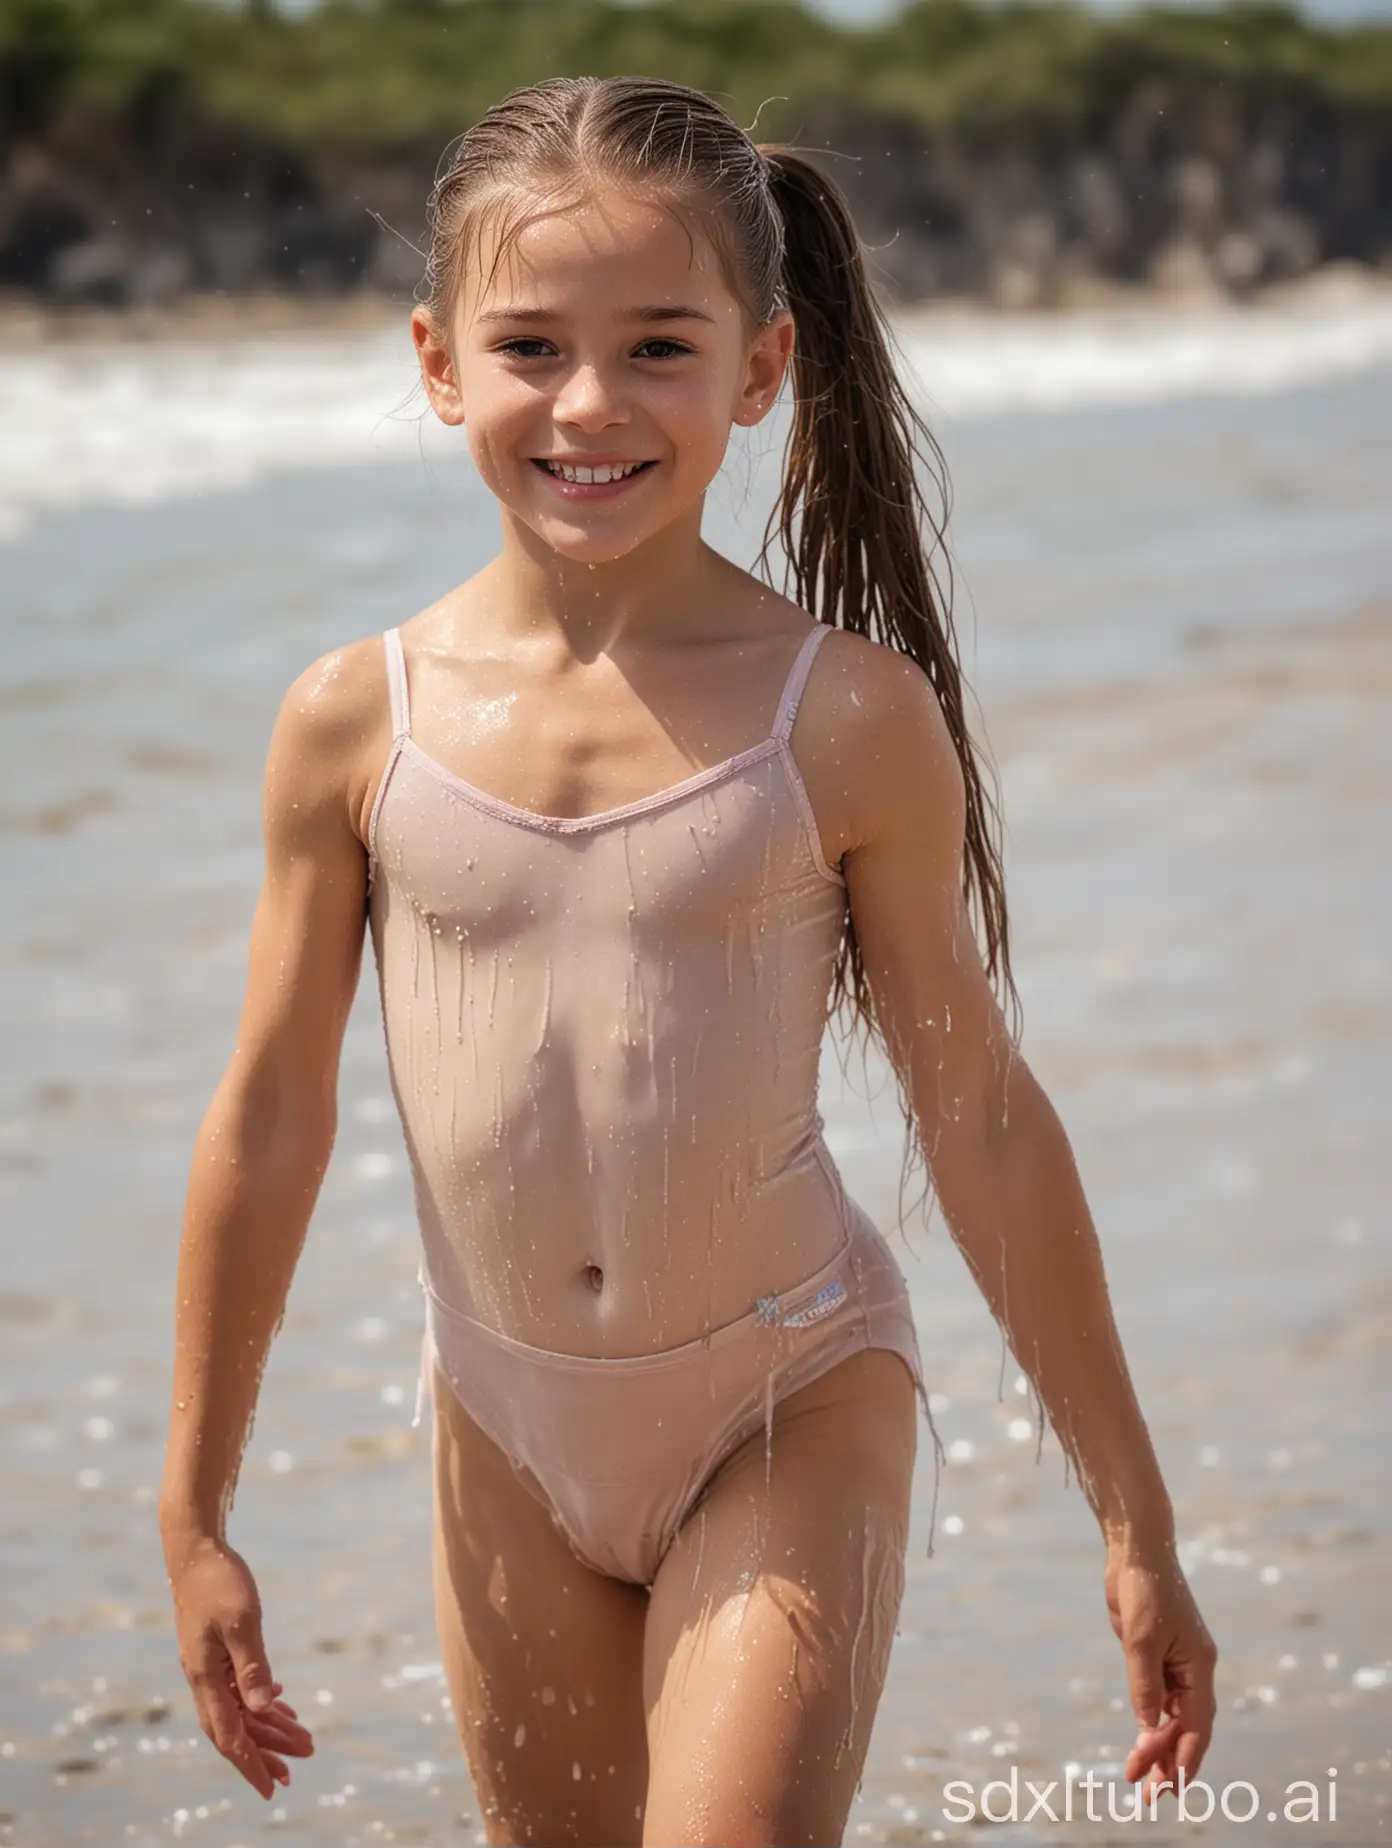 8 years old ballerina girl, long hair in a ponytail, super mega muscular, topless, smile, at the beach, wet